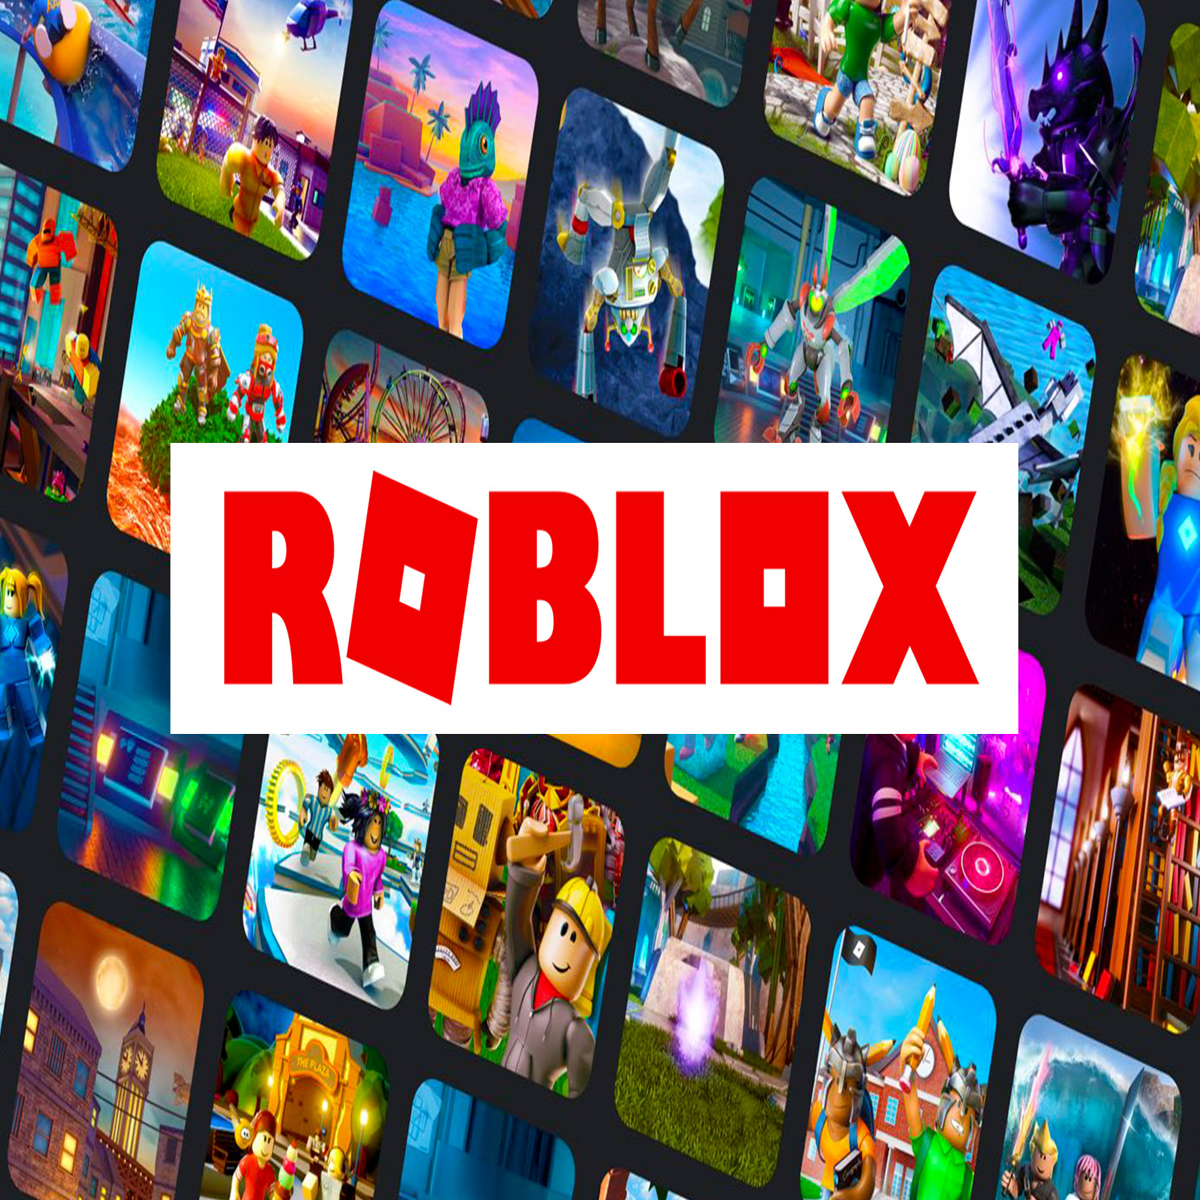 Allow all robux purchase types on every platform - Website Features -  Developer Forum